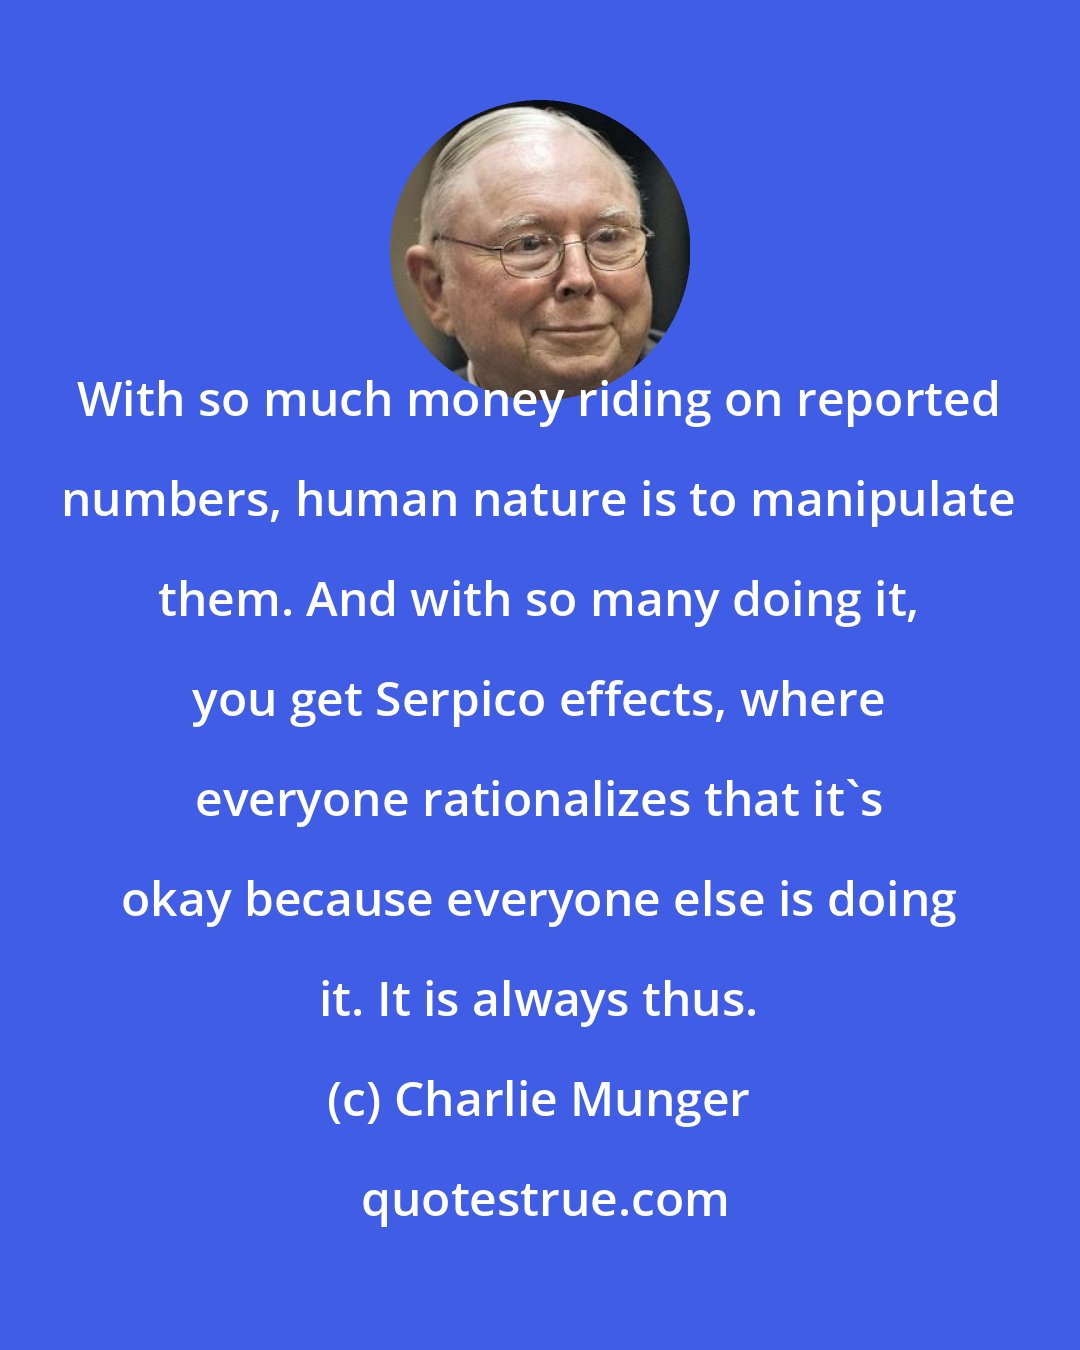 Charlie Munger: With so much money riding on reported numbers, human nature is to manipulate them. And with so many doing it, you get Serpico effects, where everyone rationalizes that it's okay because everyone else is doing it. It is always thus.